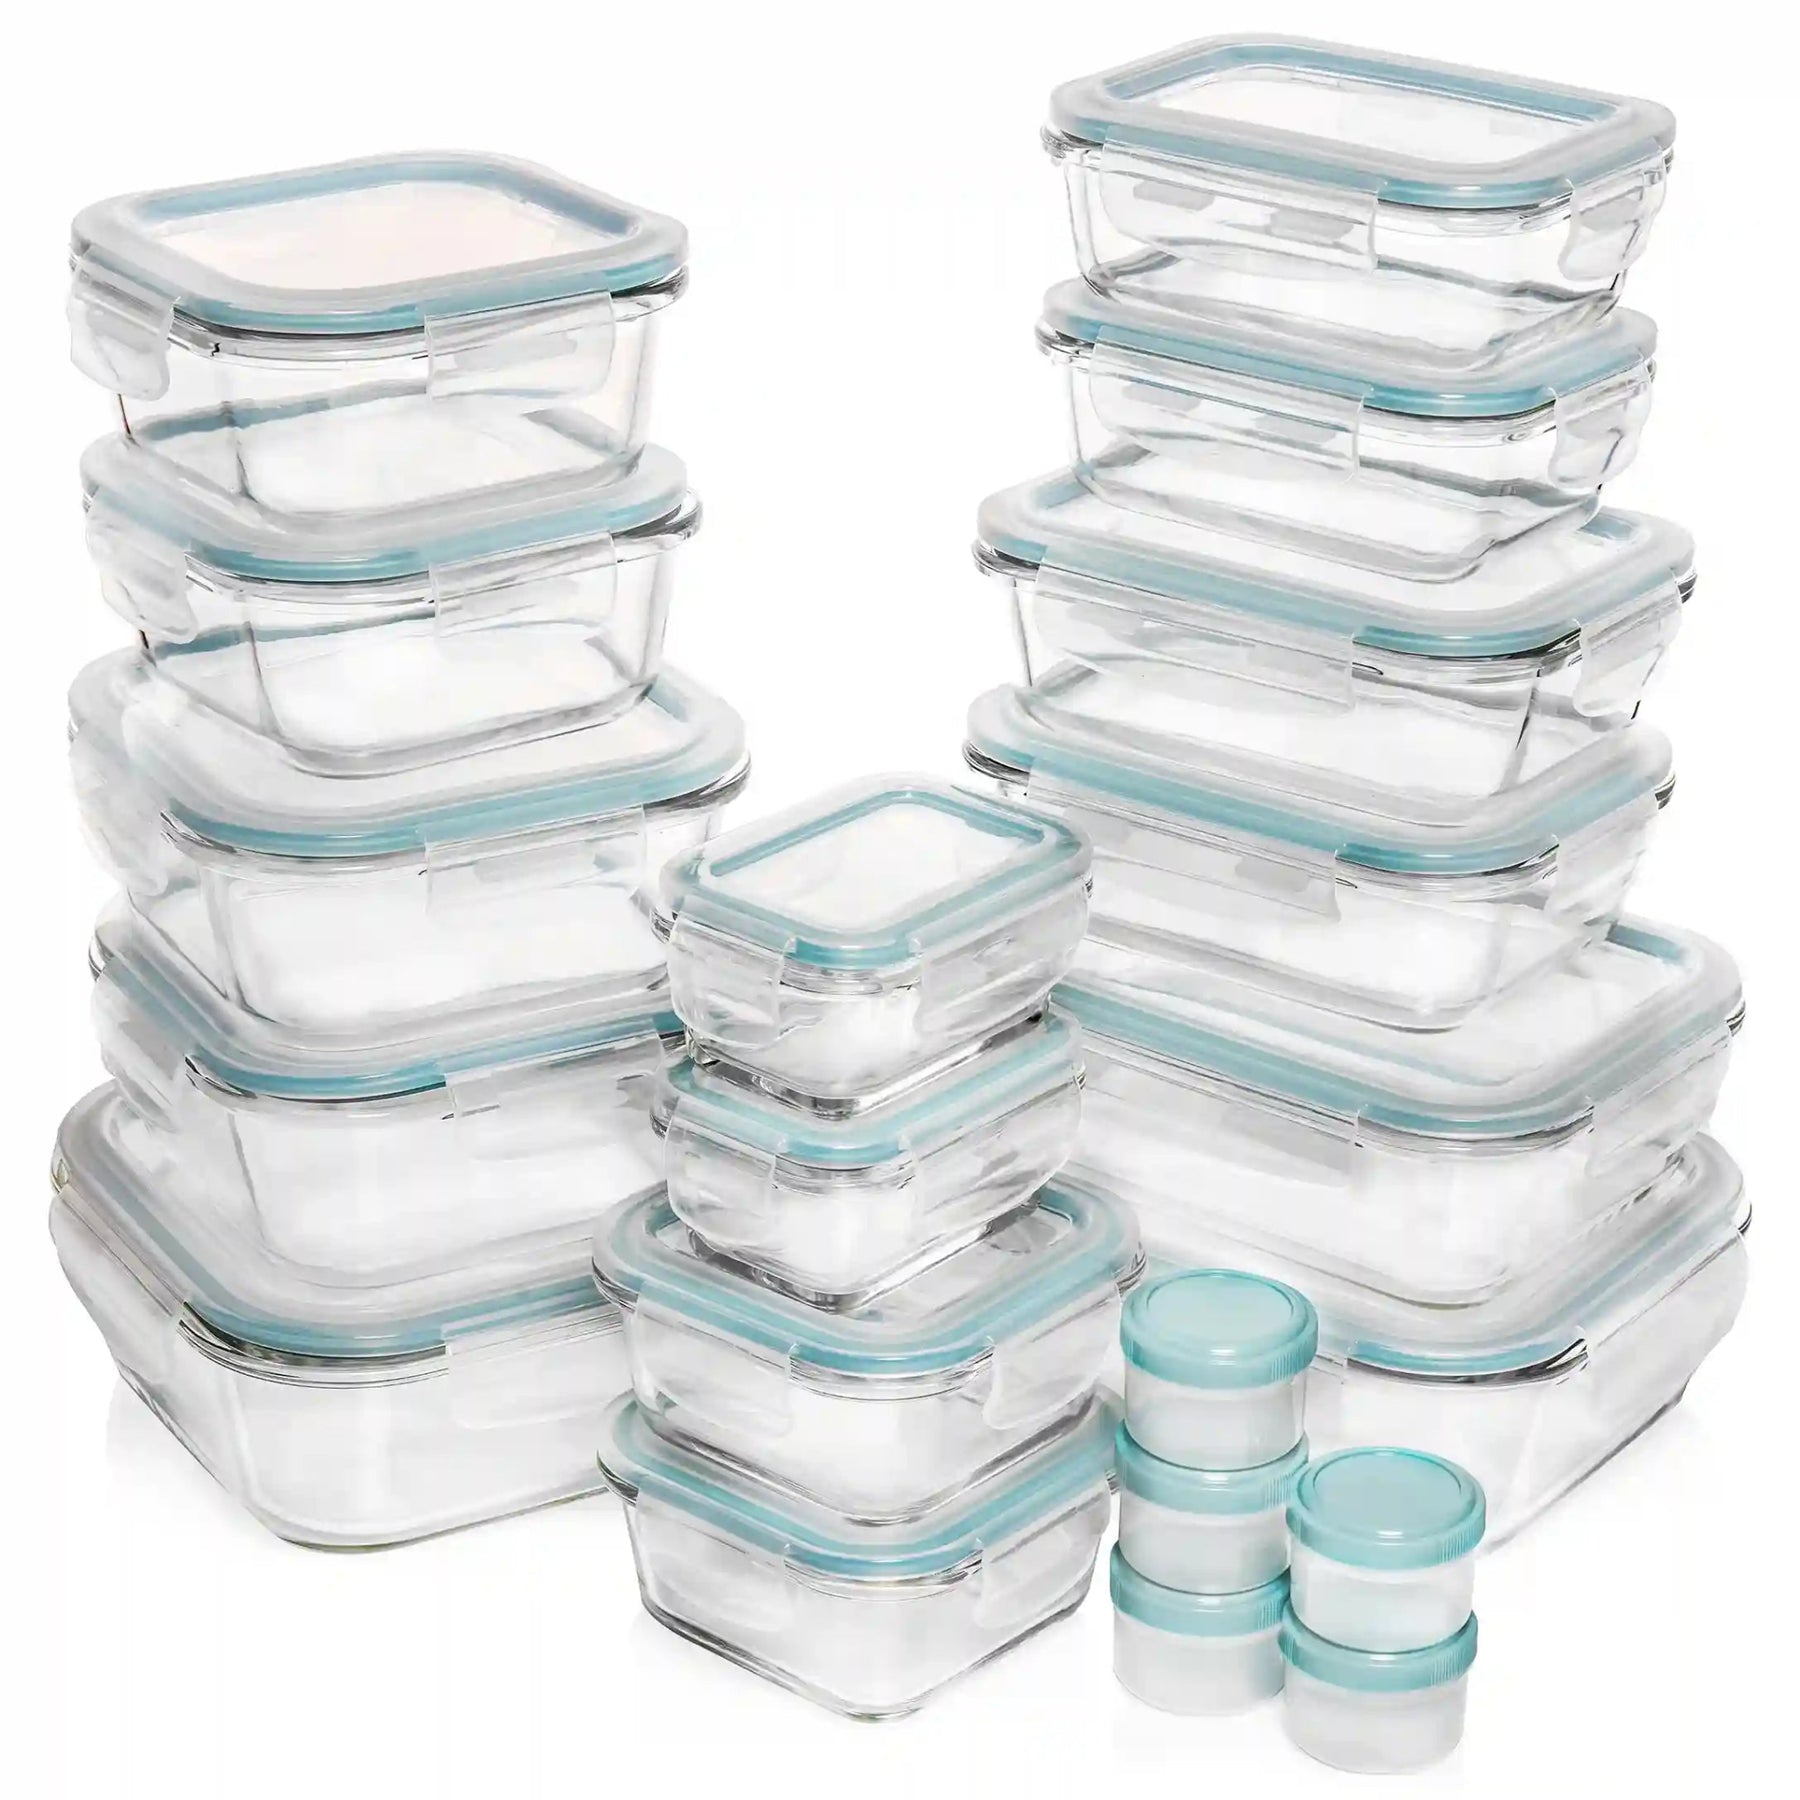 Razab HomeGoods Extra Large Glass Food Storage Containers with Airtight Lid  6 Pc [3 containers with lids] Microwave/Oven/Freezer & Dishwasher